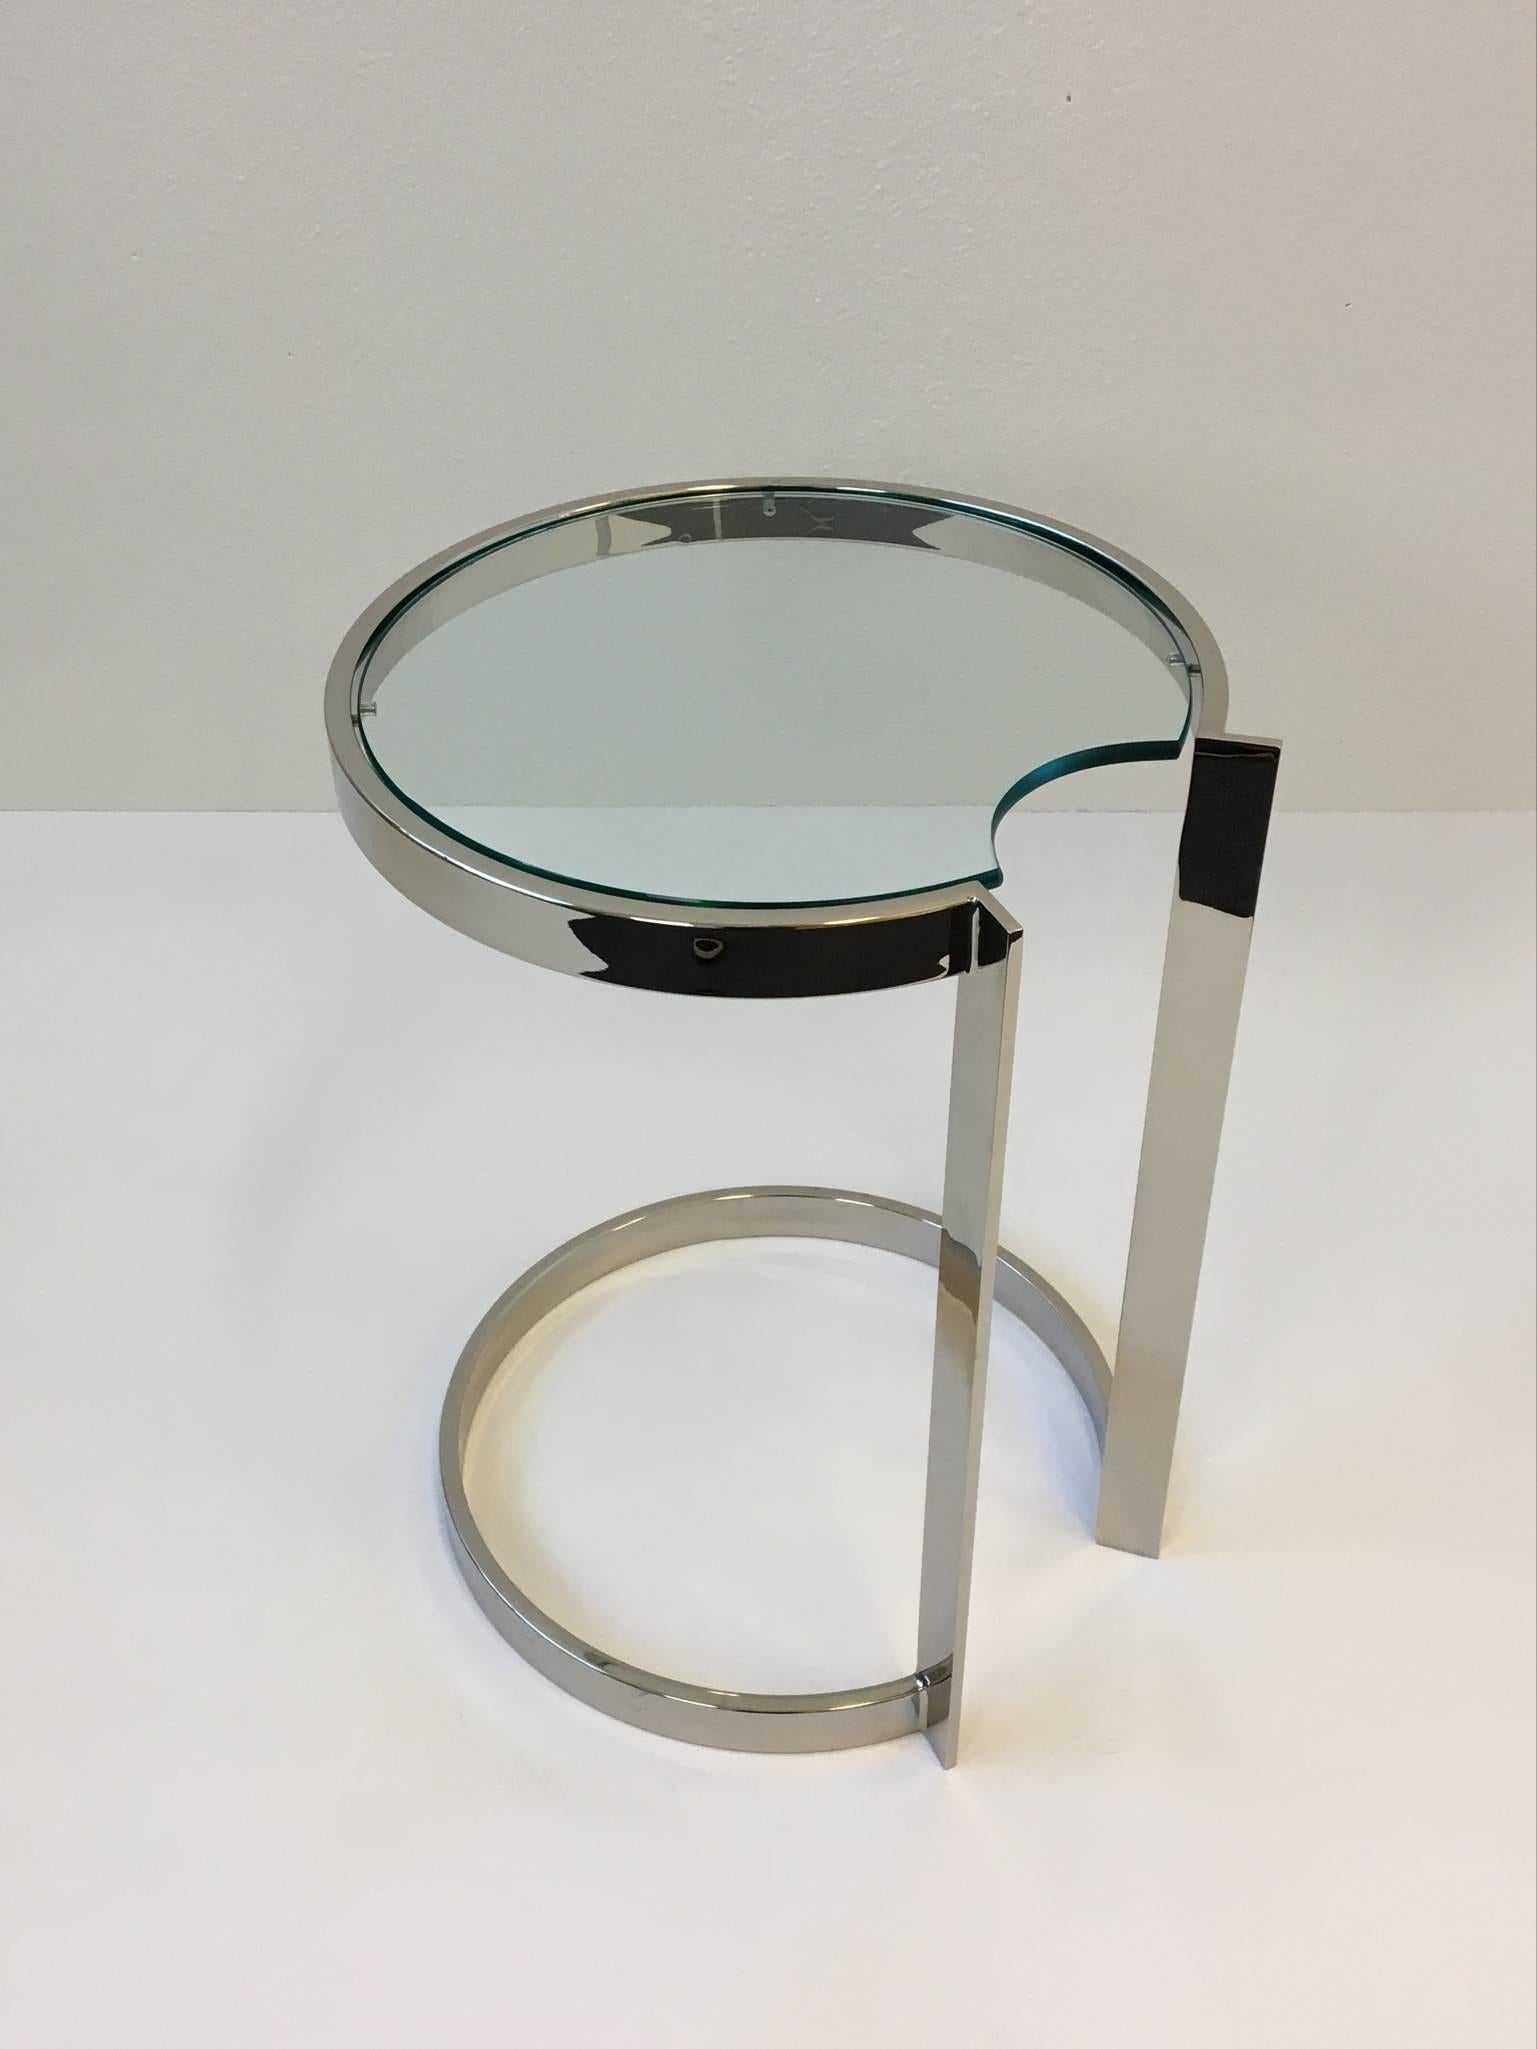 A 1970s occasional table in the style of Milo Baughman. Newly replated in a polished nickel finish. The glass is original, so it has minor wear.